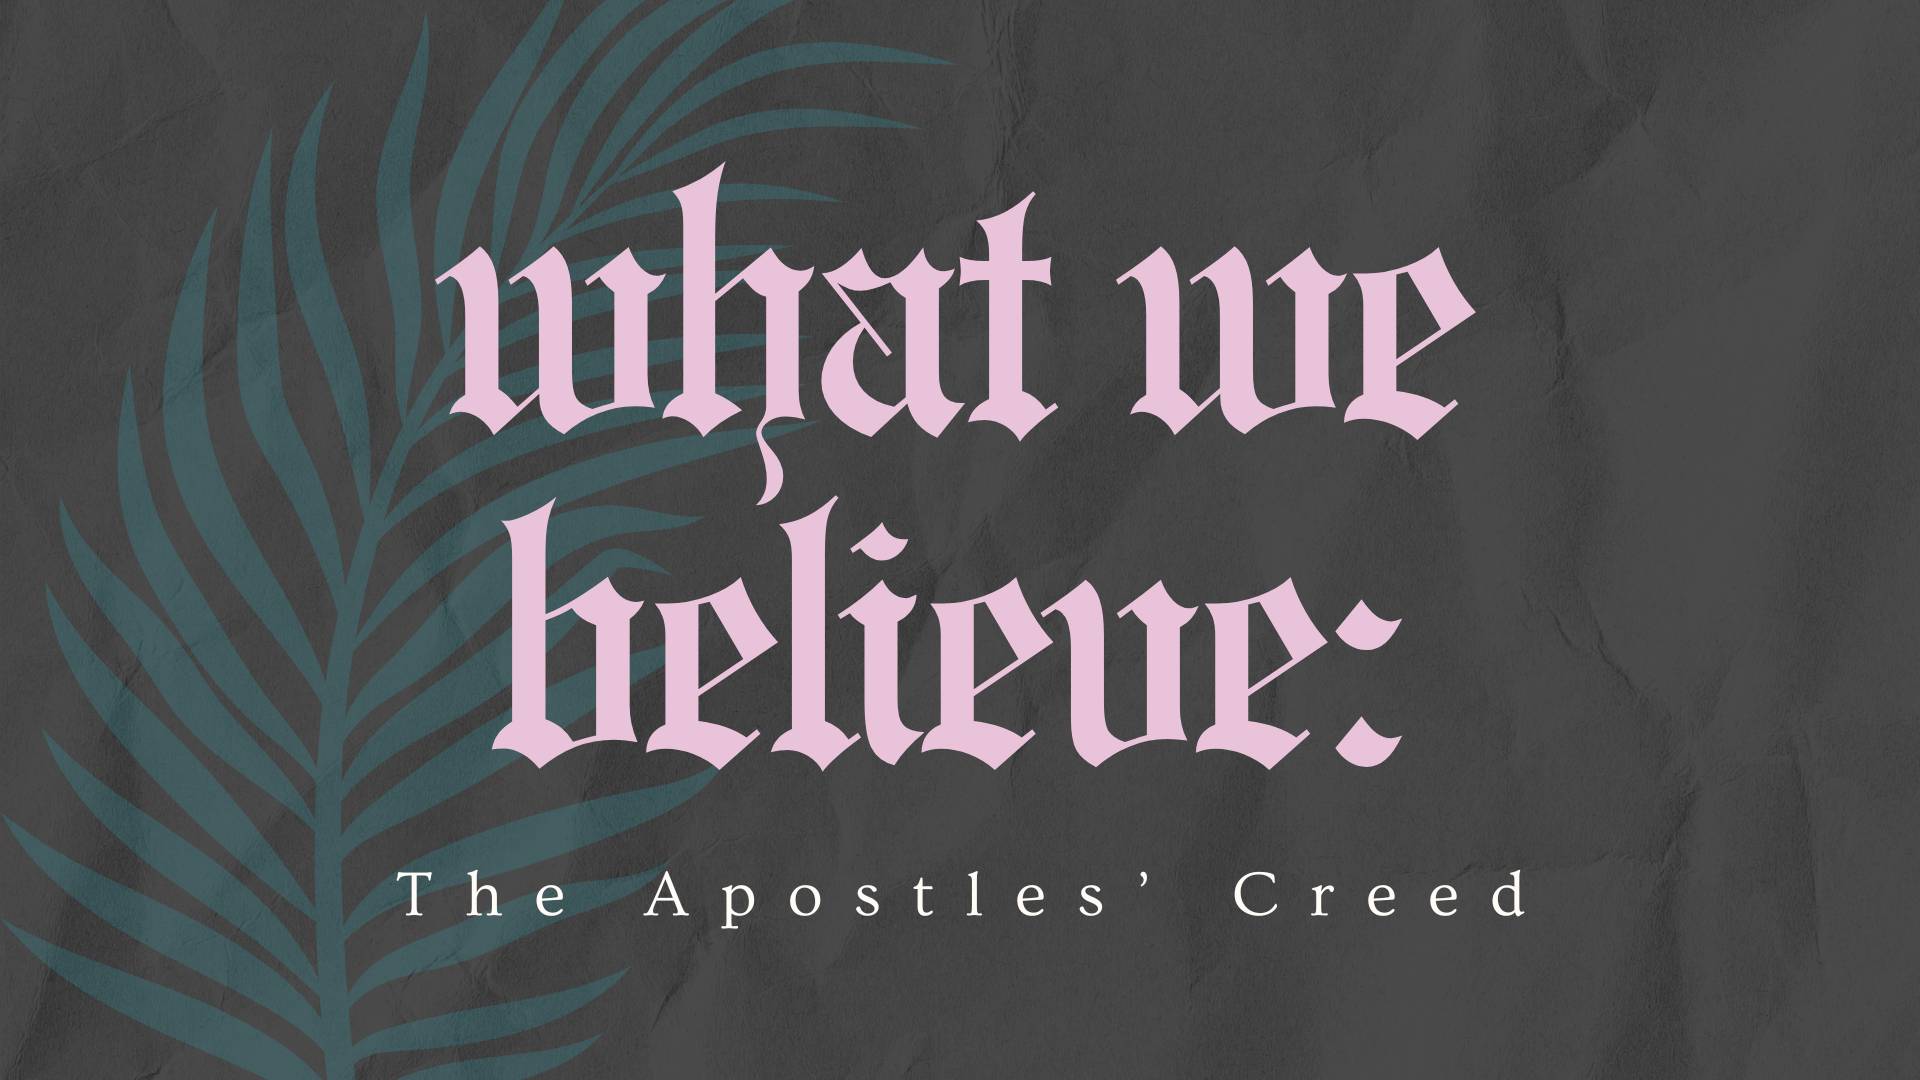 What We Believe: The Apostles' Creed